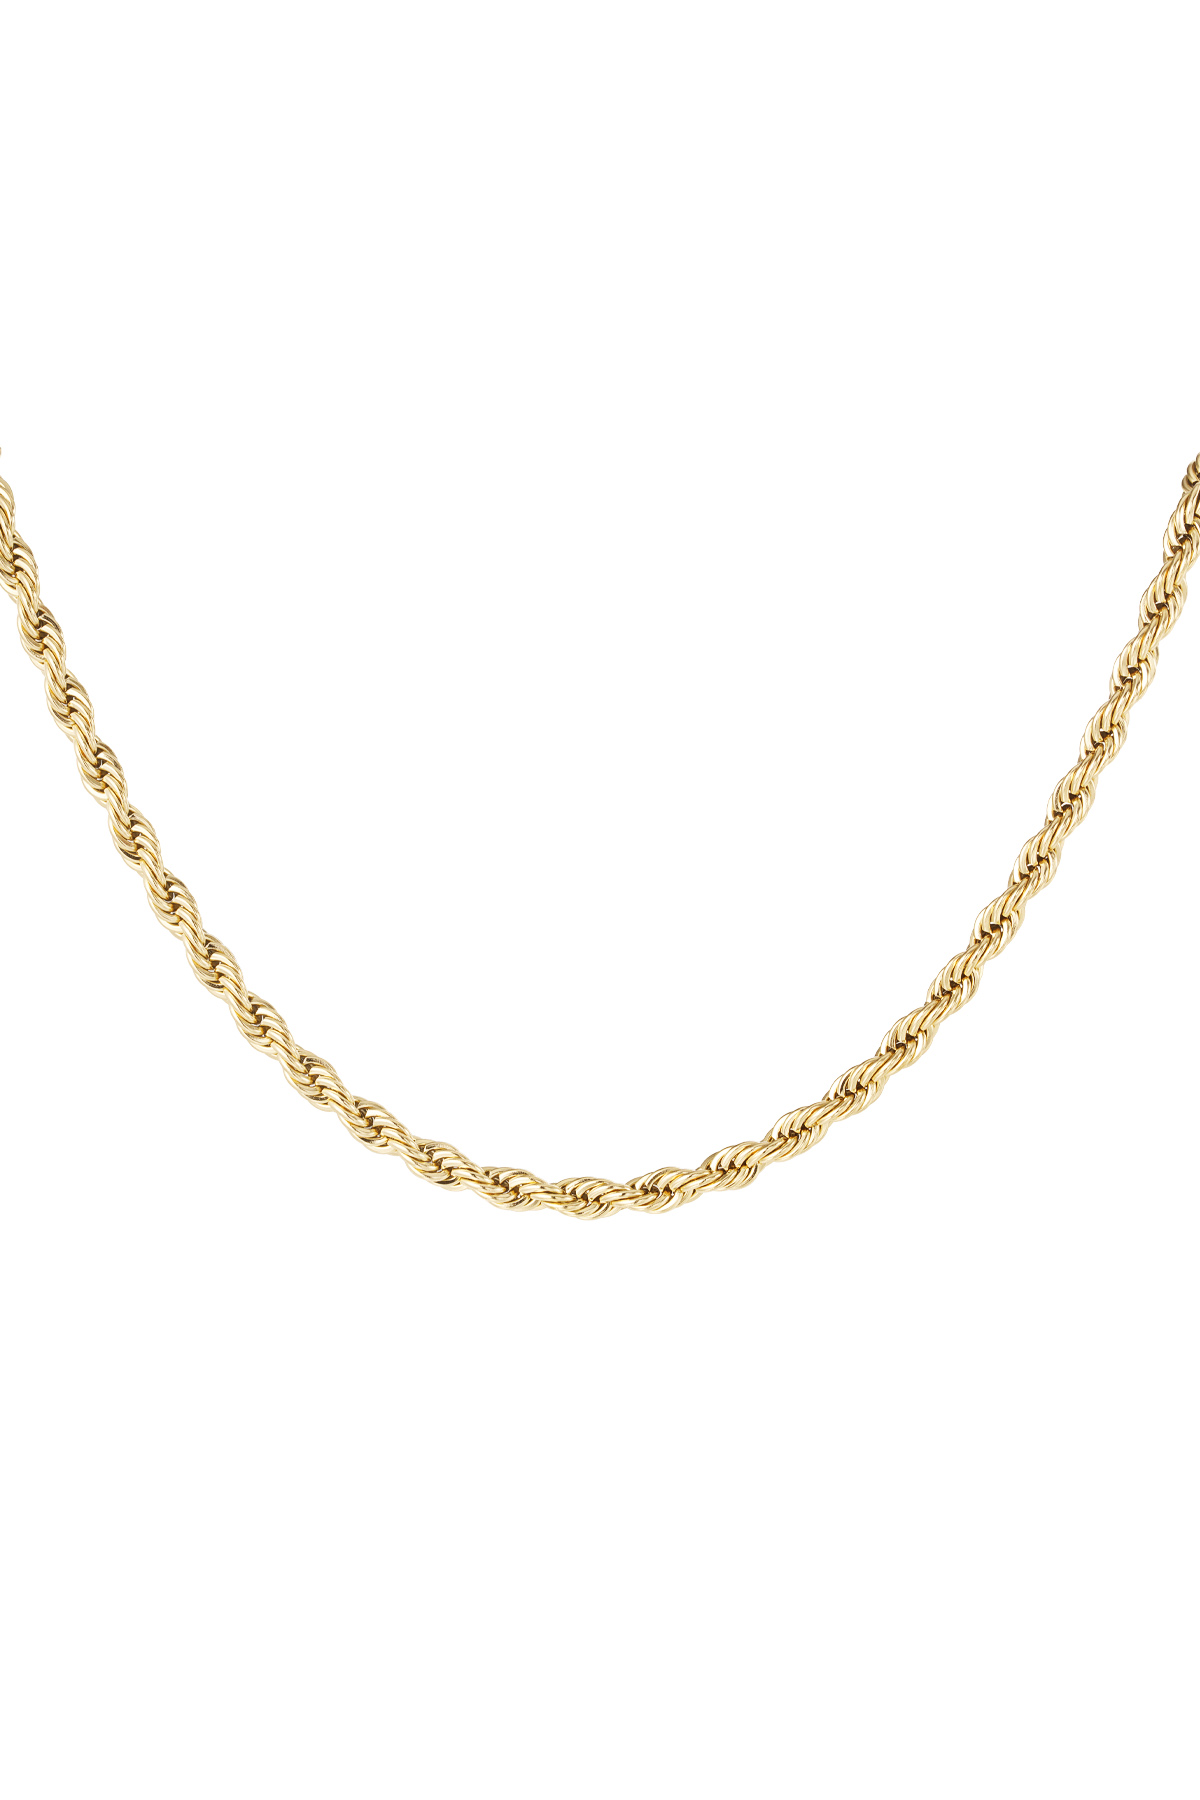 Unisex necklace thick twisted short - gold